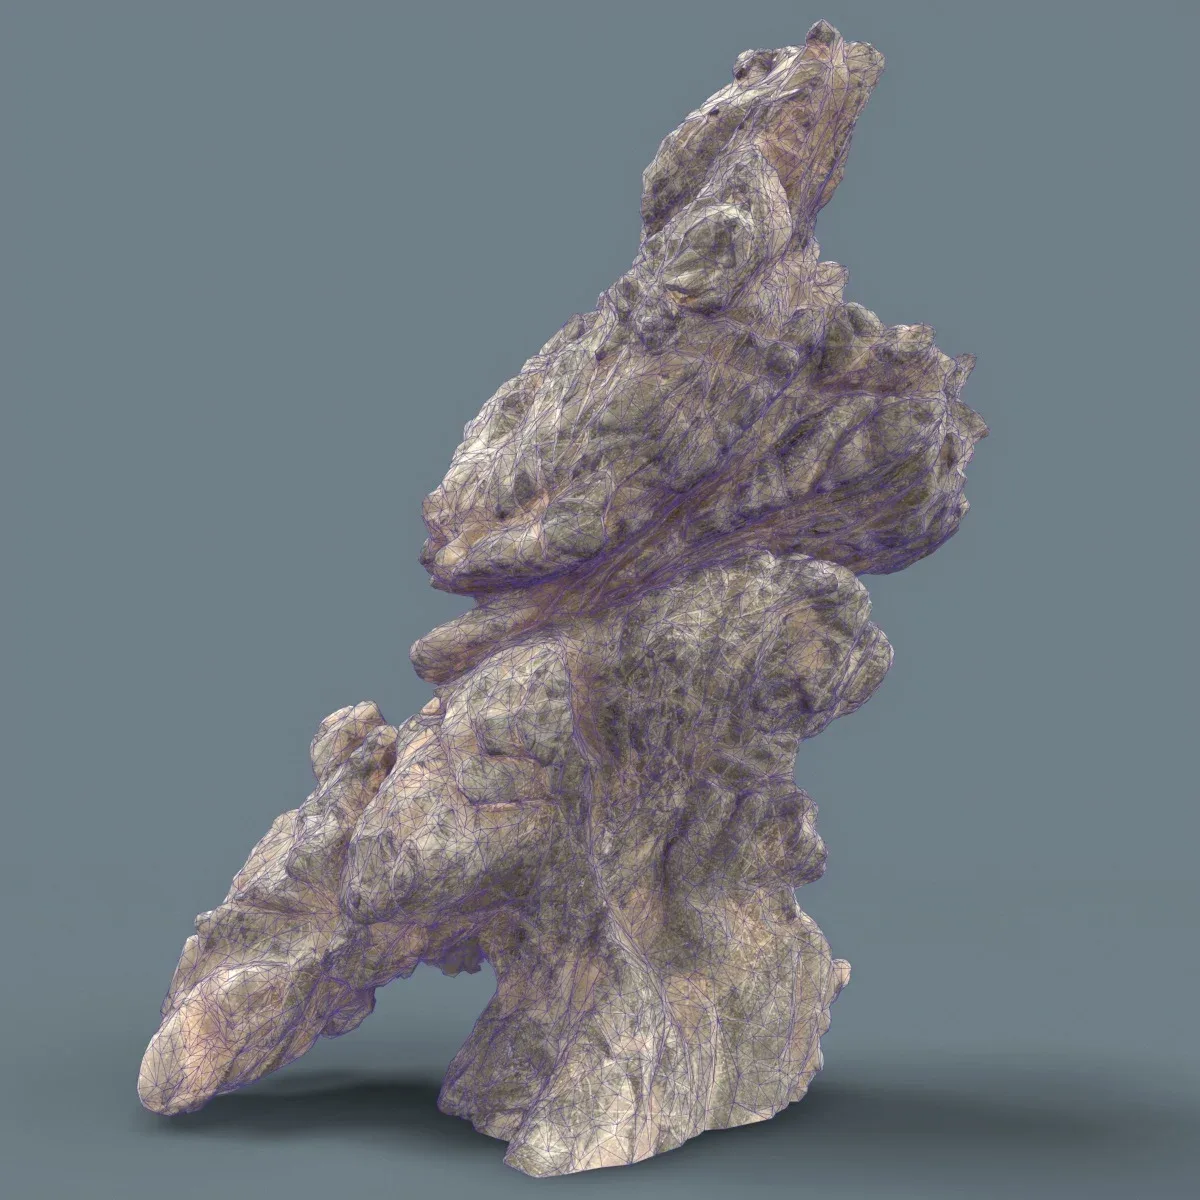 Suiseki Stone 18 from Japan - High-Quality 3D Model with Metallic-Roughness PBR Textures for Games, VR, and Art Projects